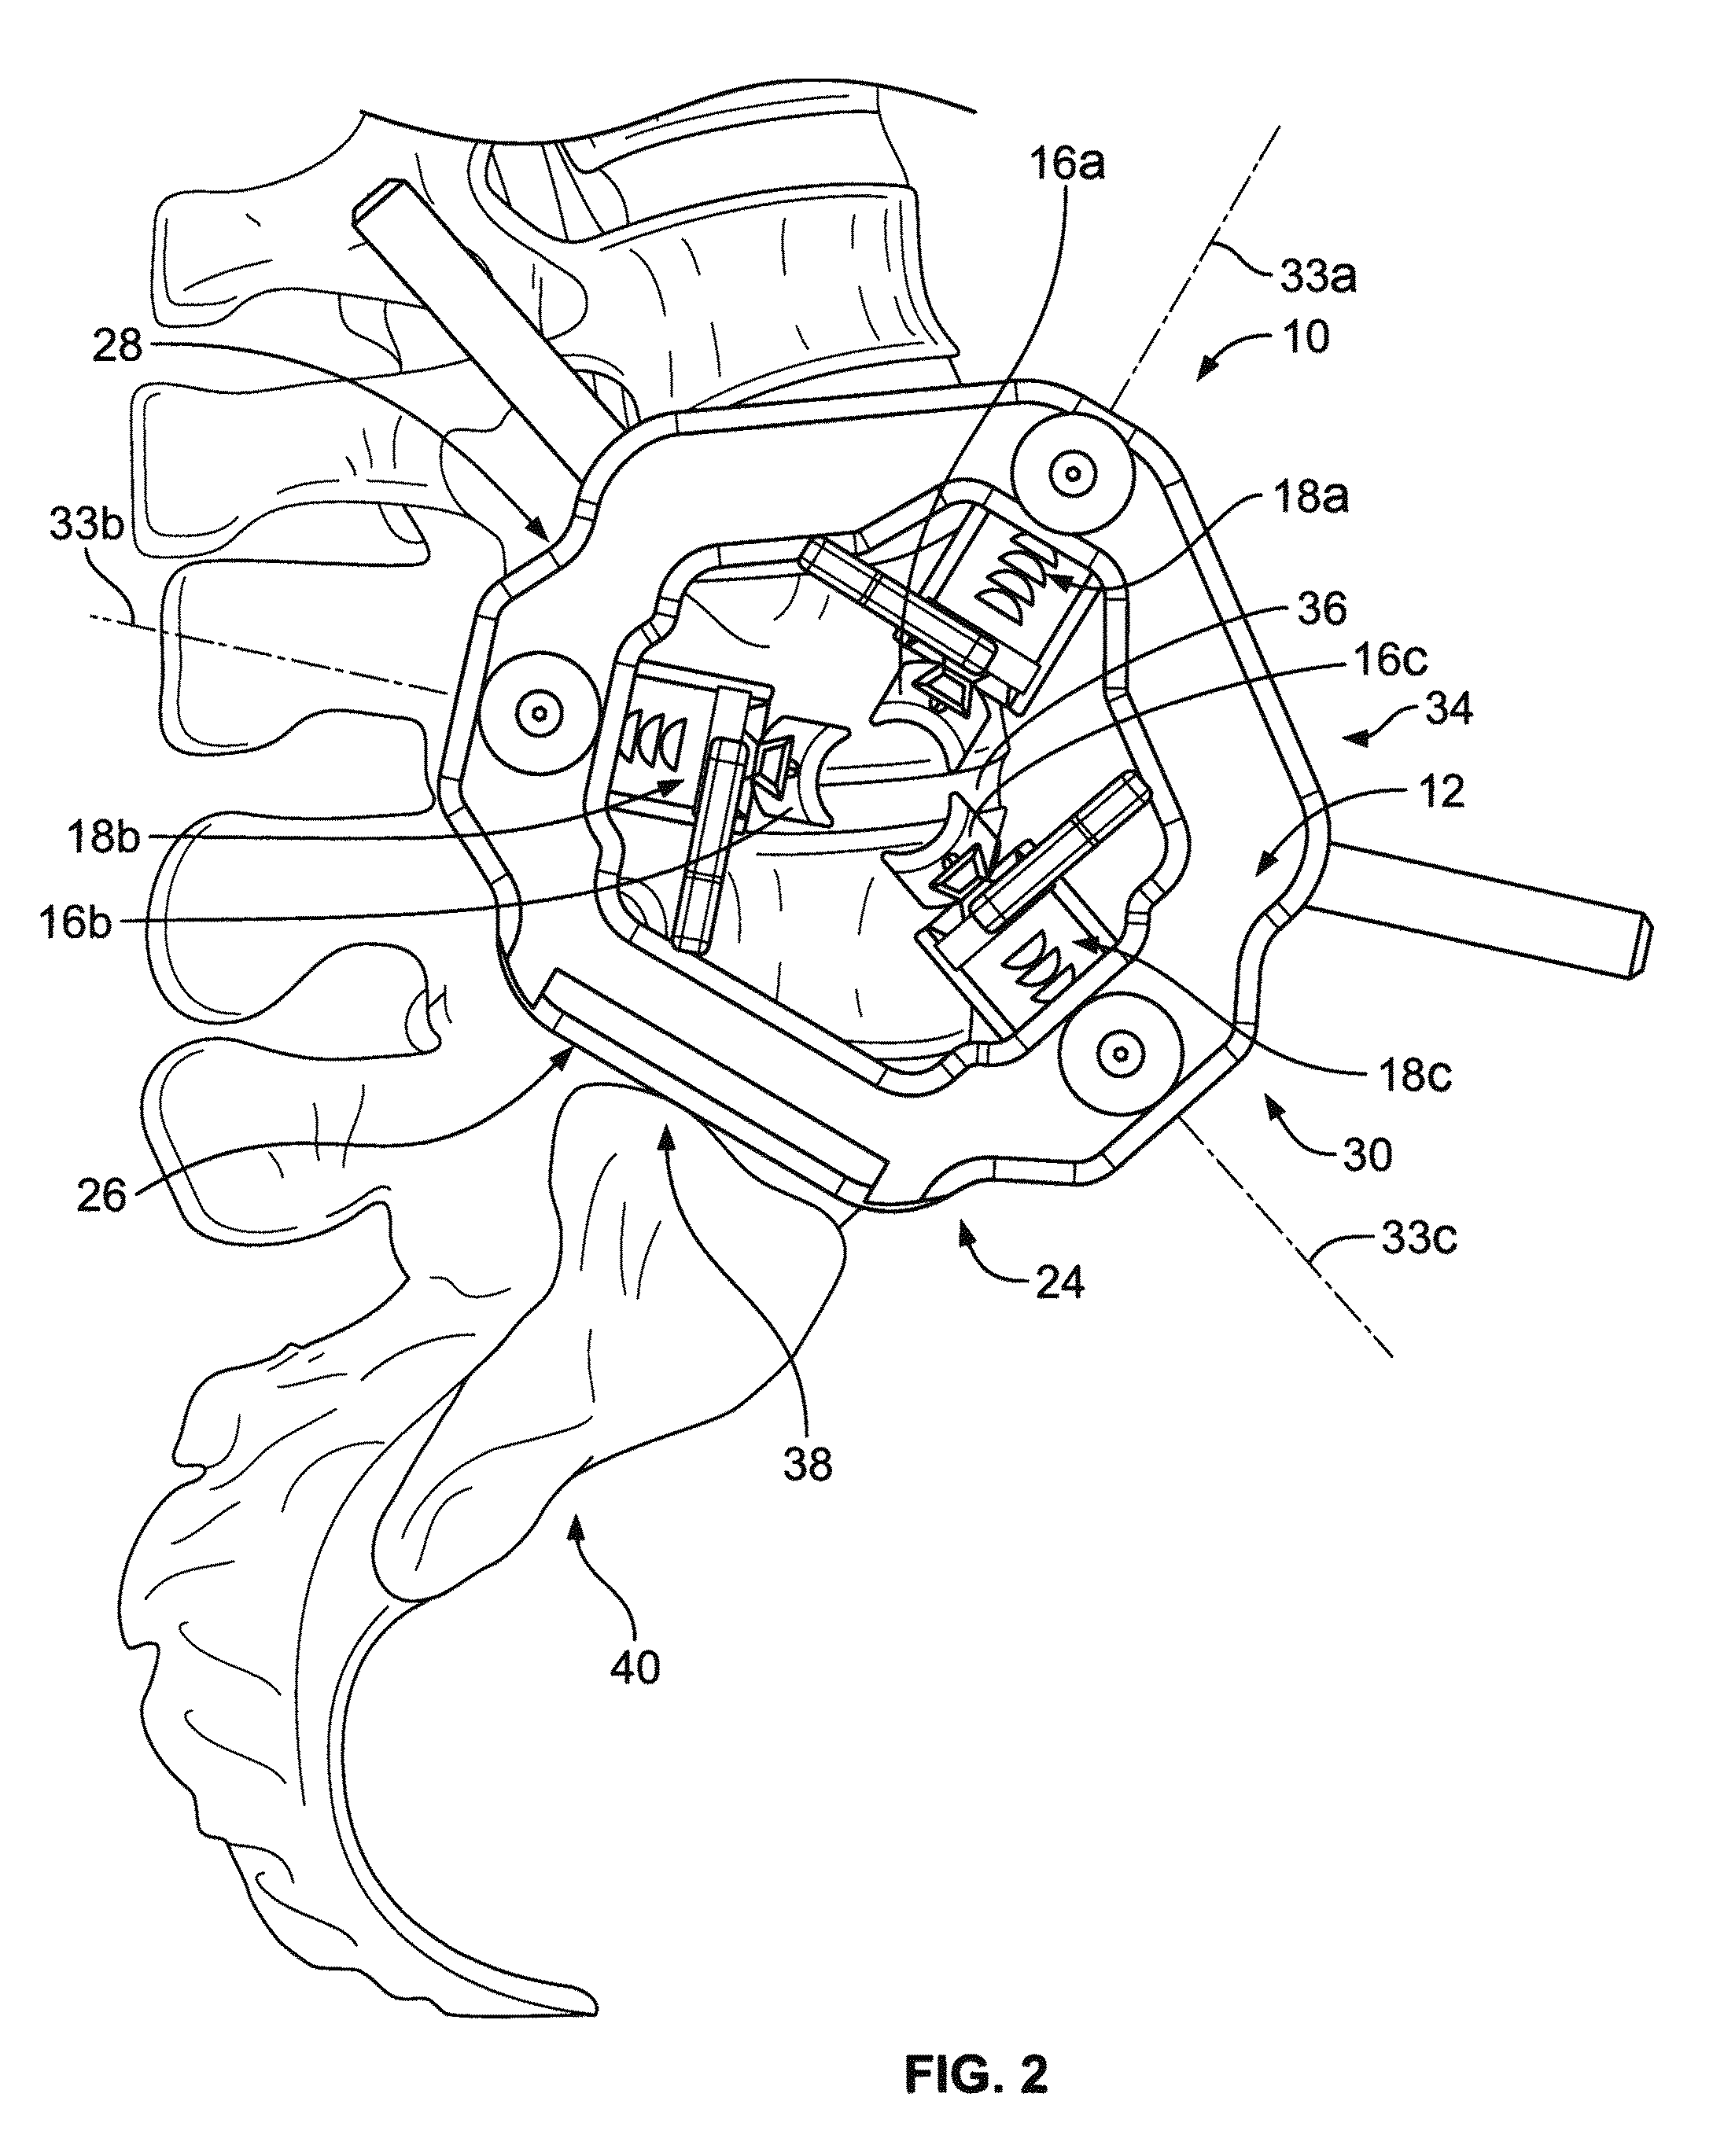 Retraction apparatus and method of use